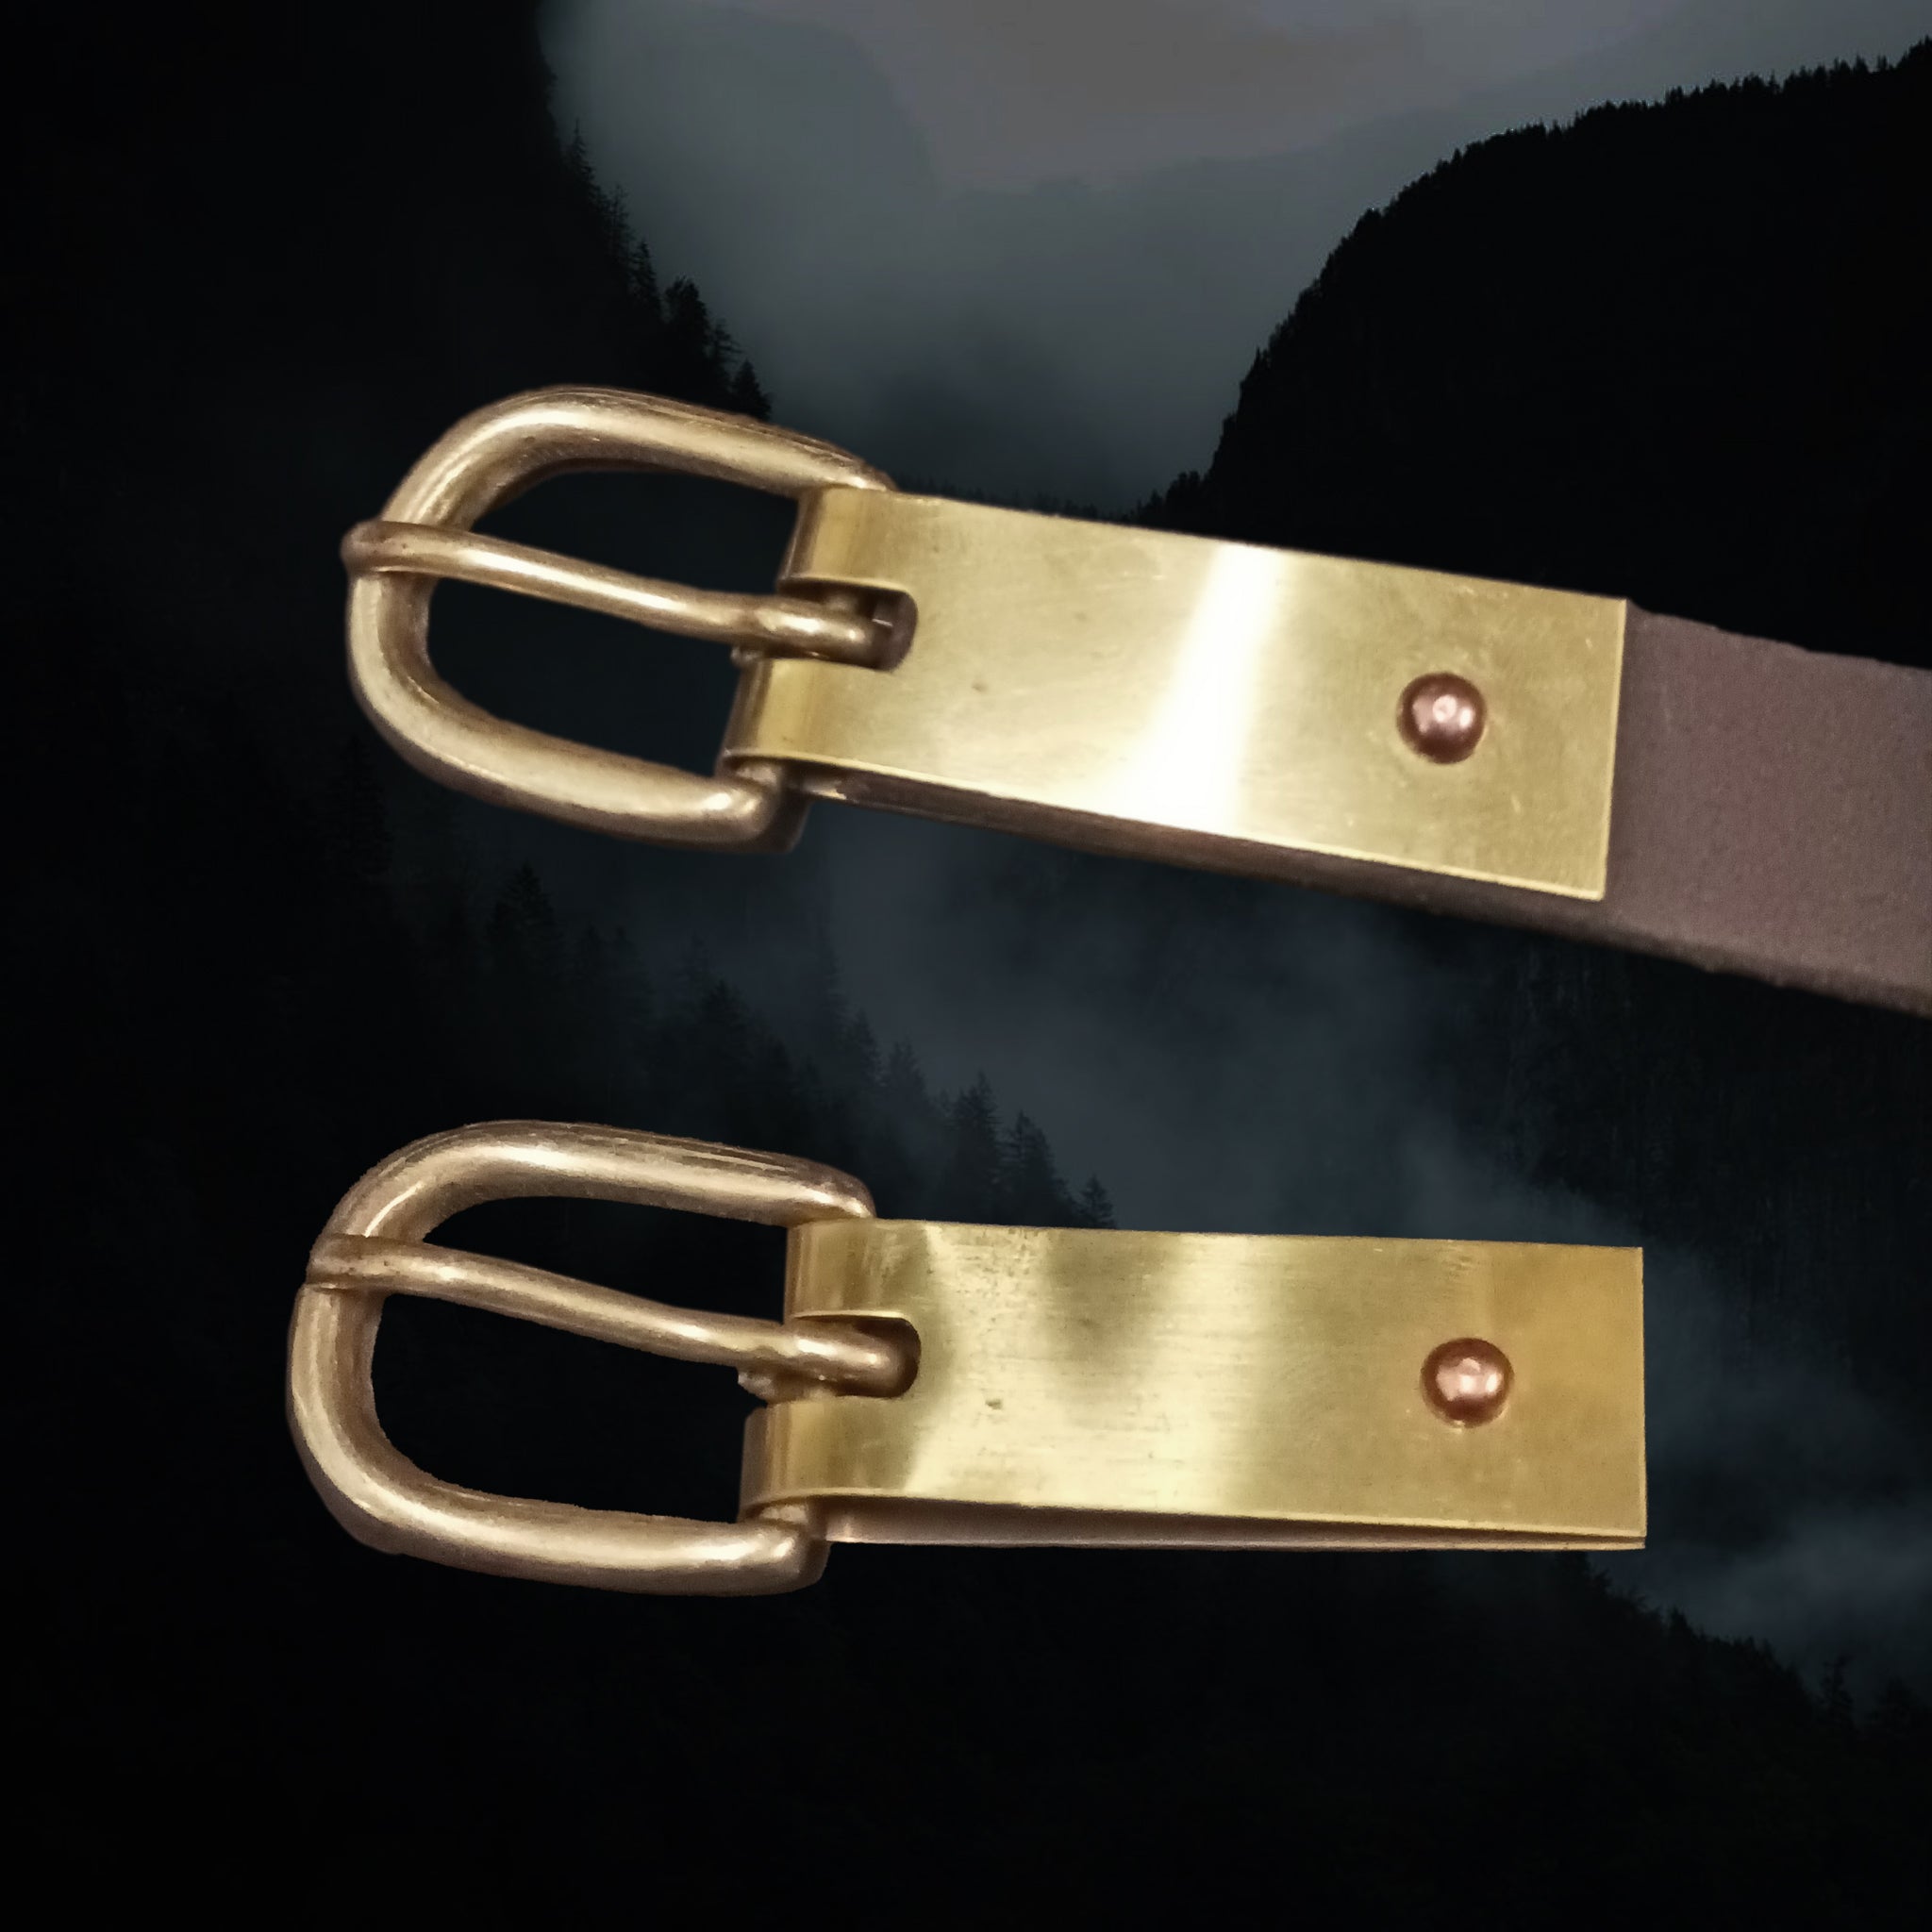 19mm (0.75 inch) Wide Brass Buckle Plate with 19mm Wide Brass Buckle, Copper Rivet and on Brown Leather Strap